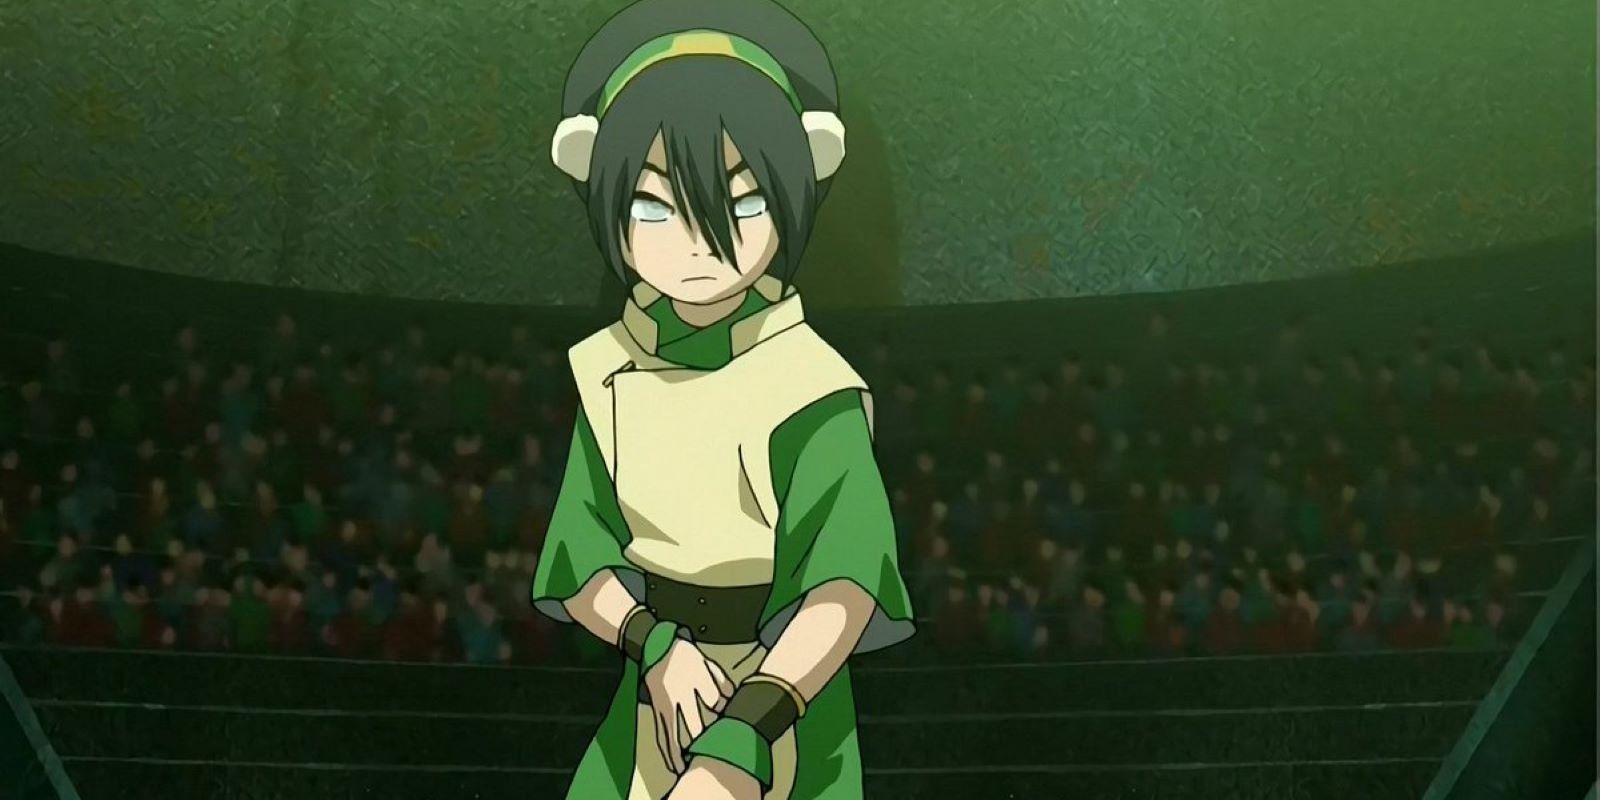 Toph in The Blind Bandit episode of Avatar The Last Airbender